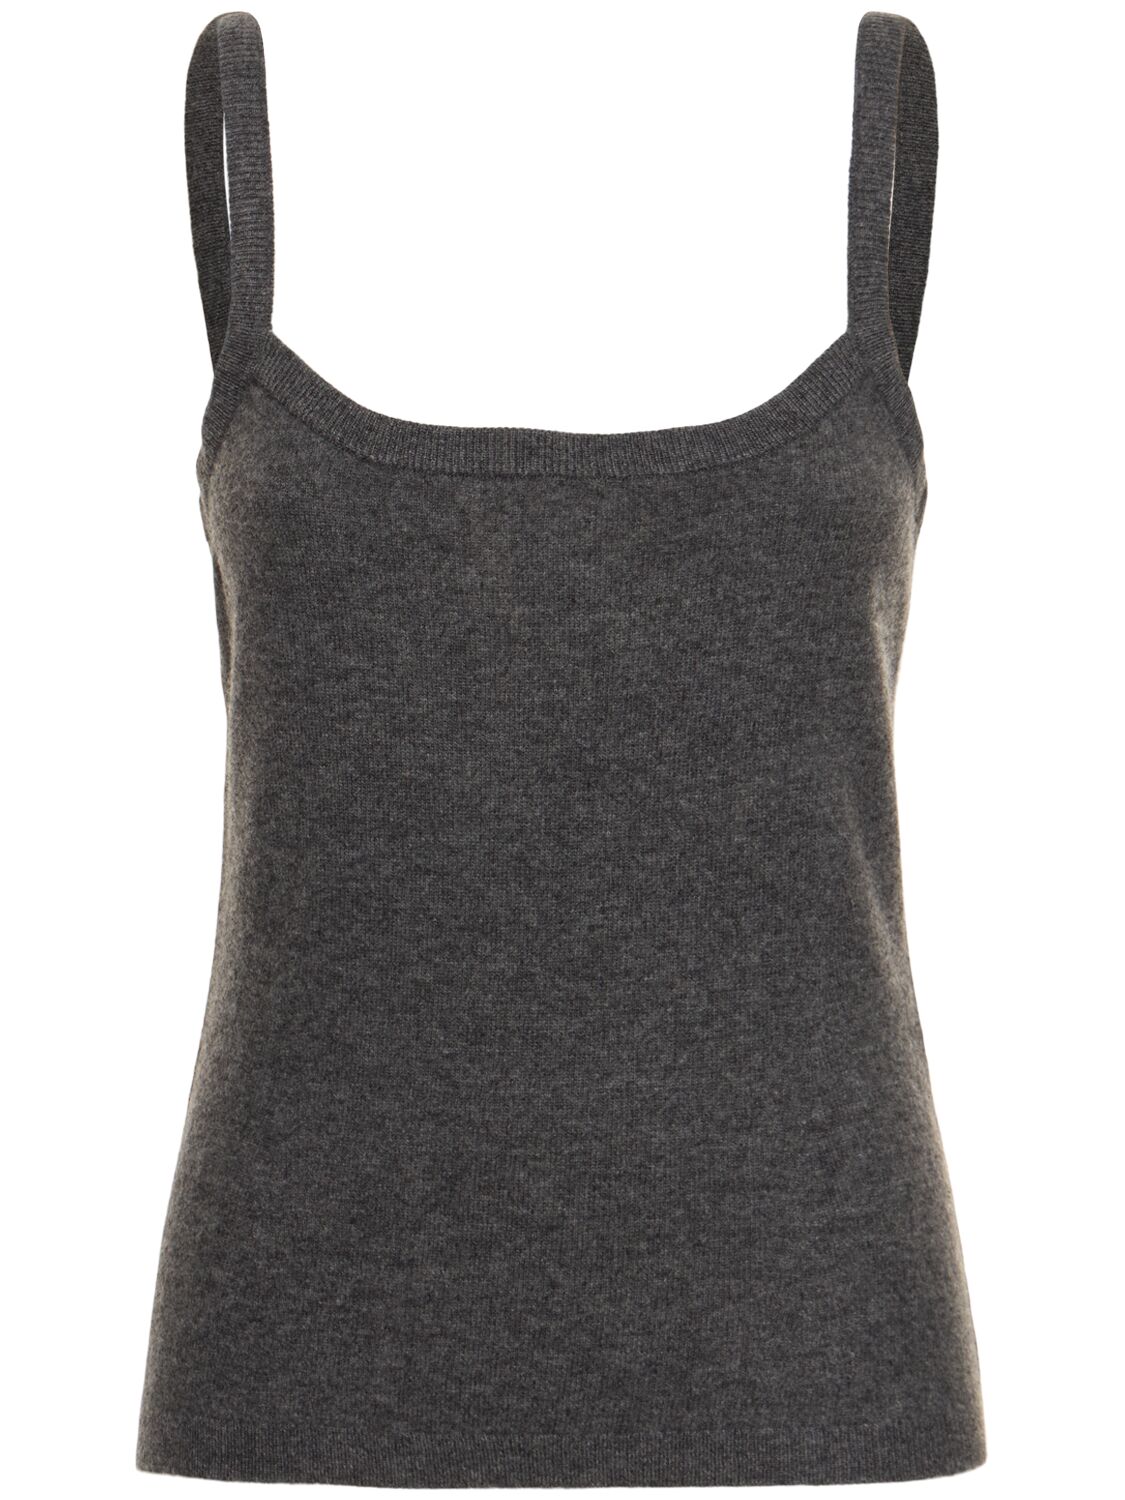 The Garment Como Wool Blend Camisole Top In Heather Grey